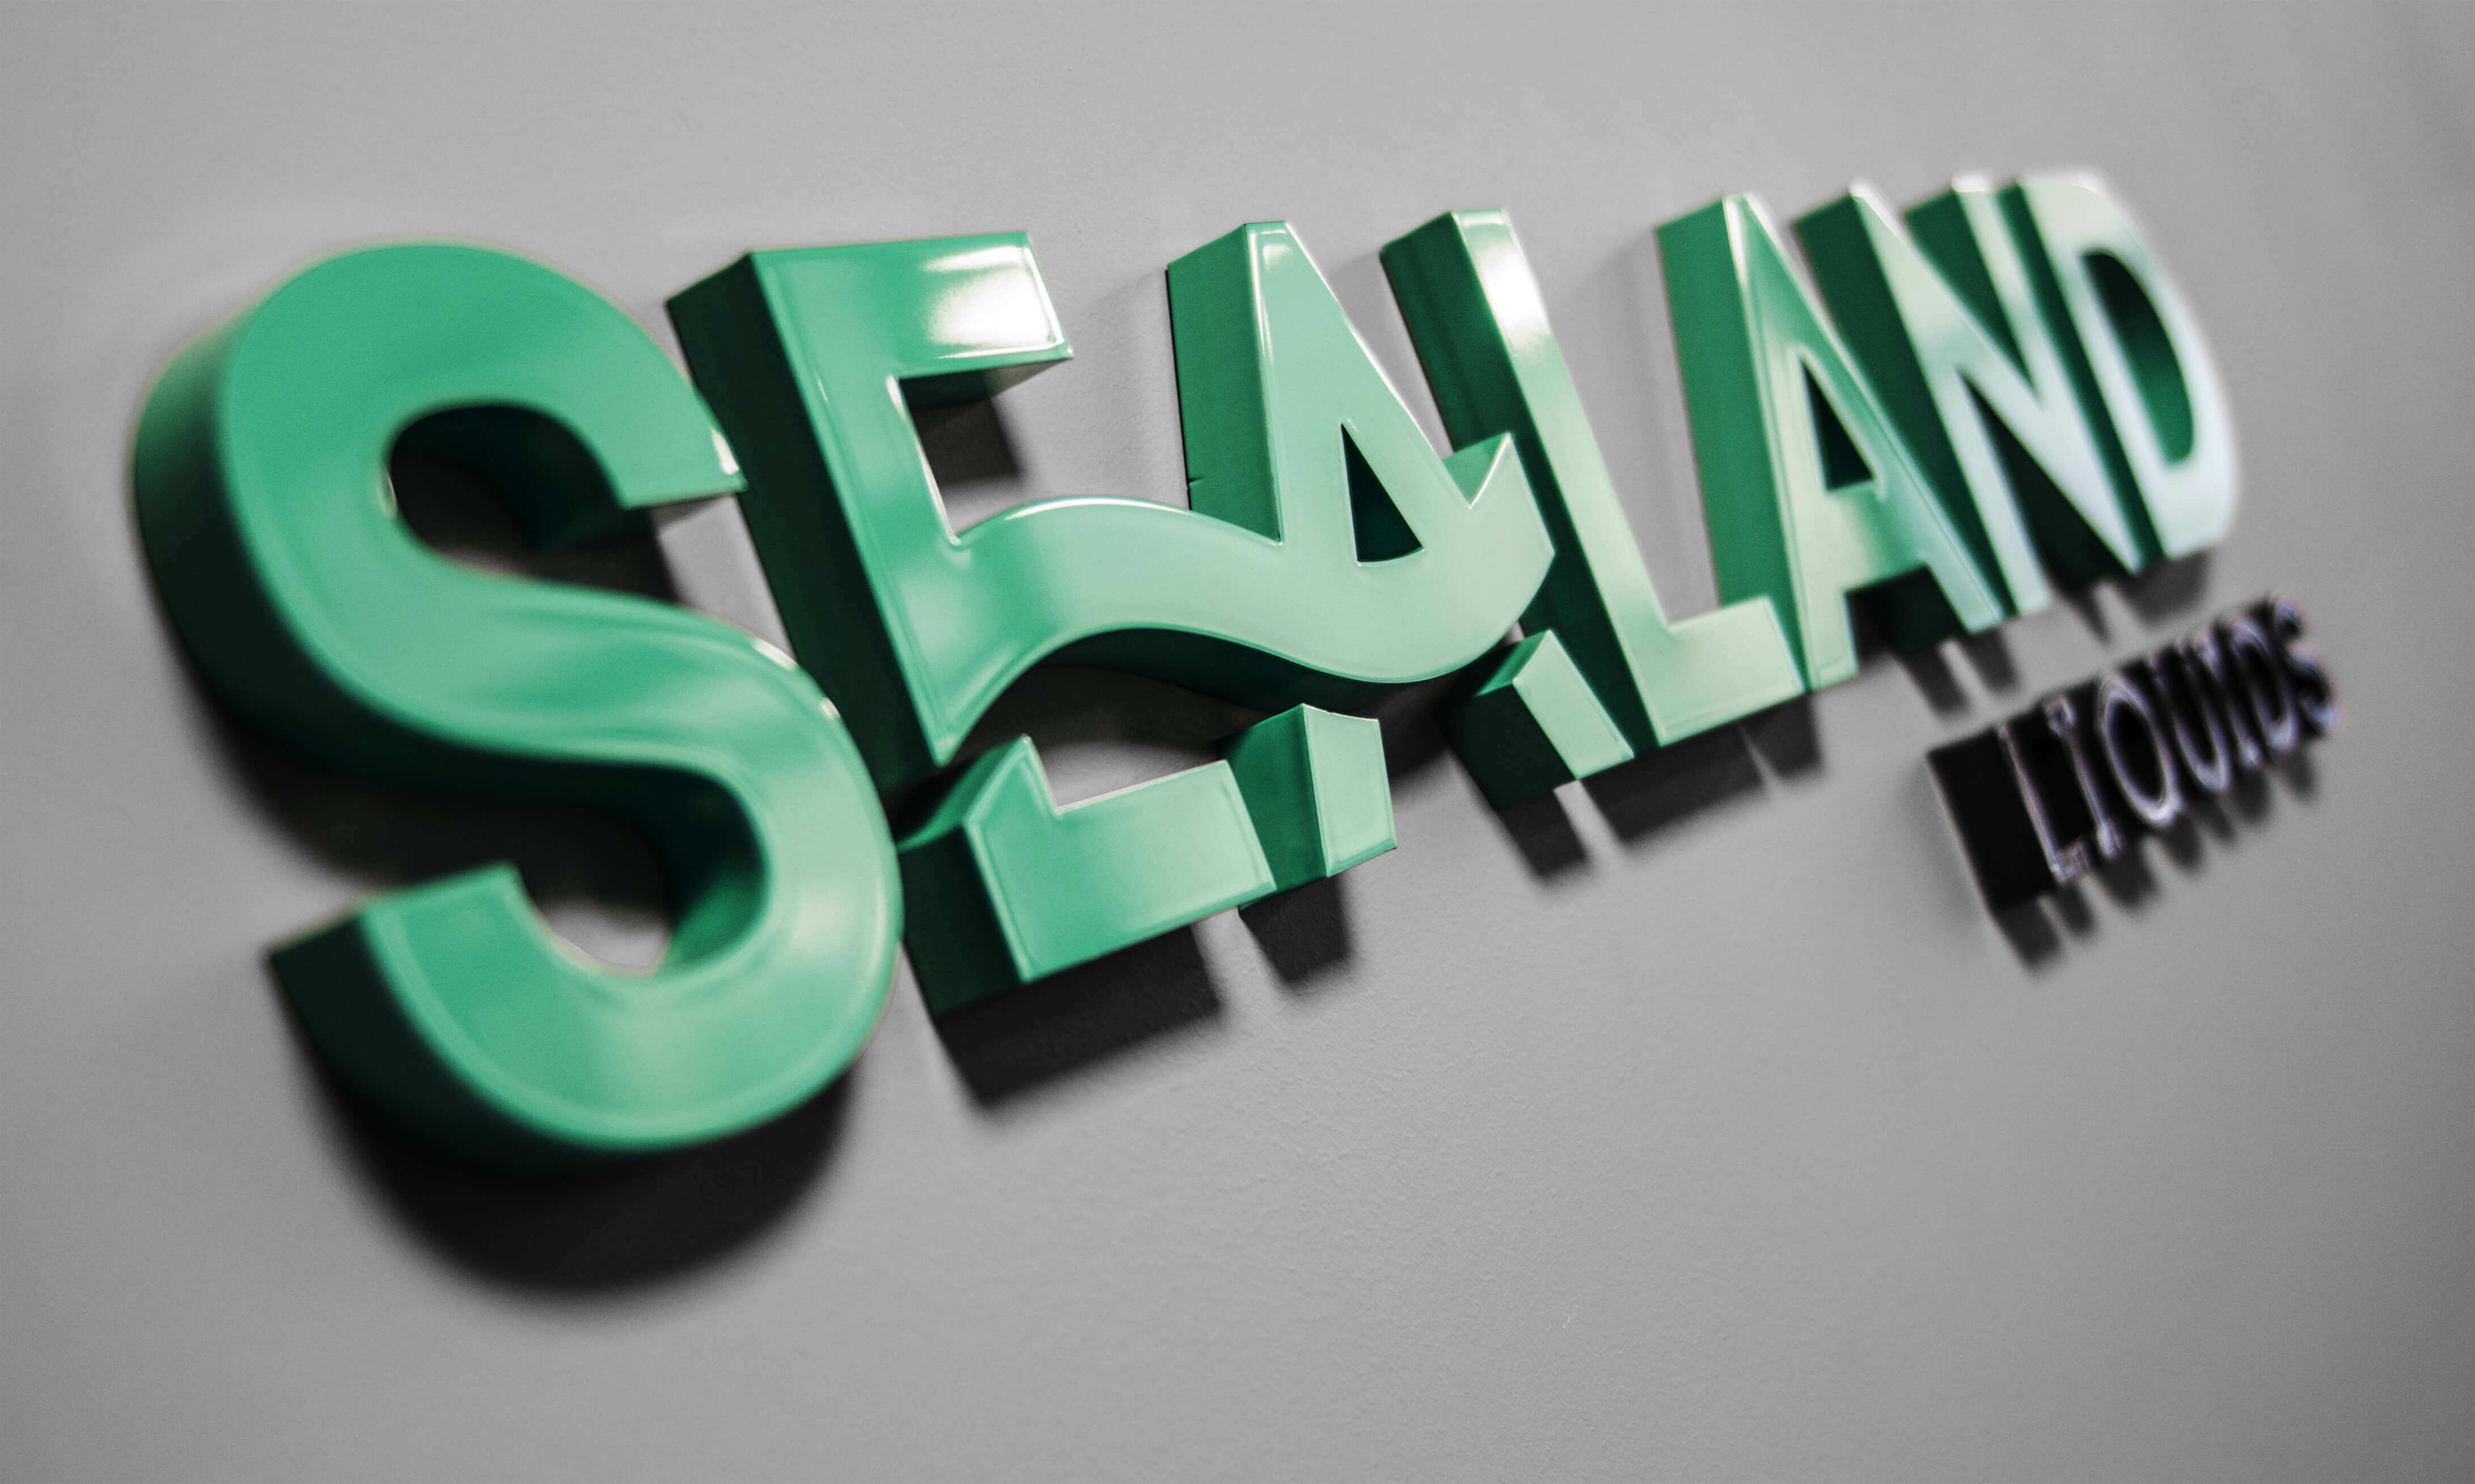 Sealand - Sealand - 3D letters placed on the wall spray painted